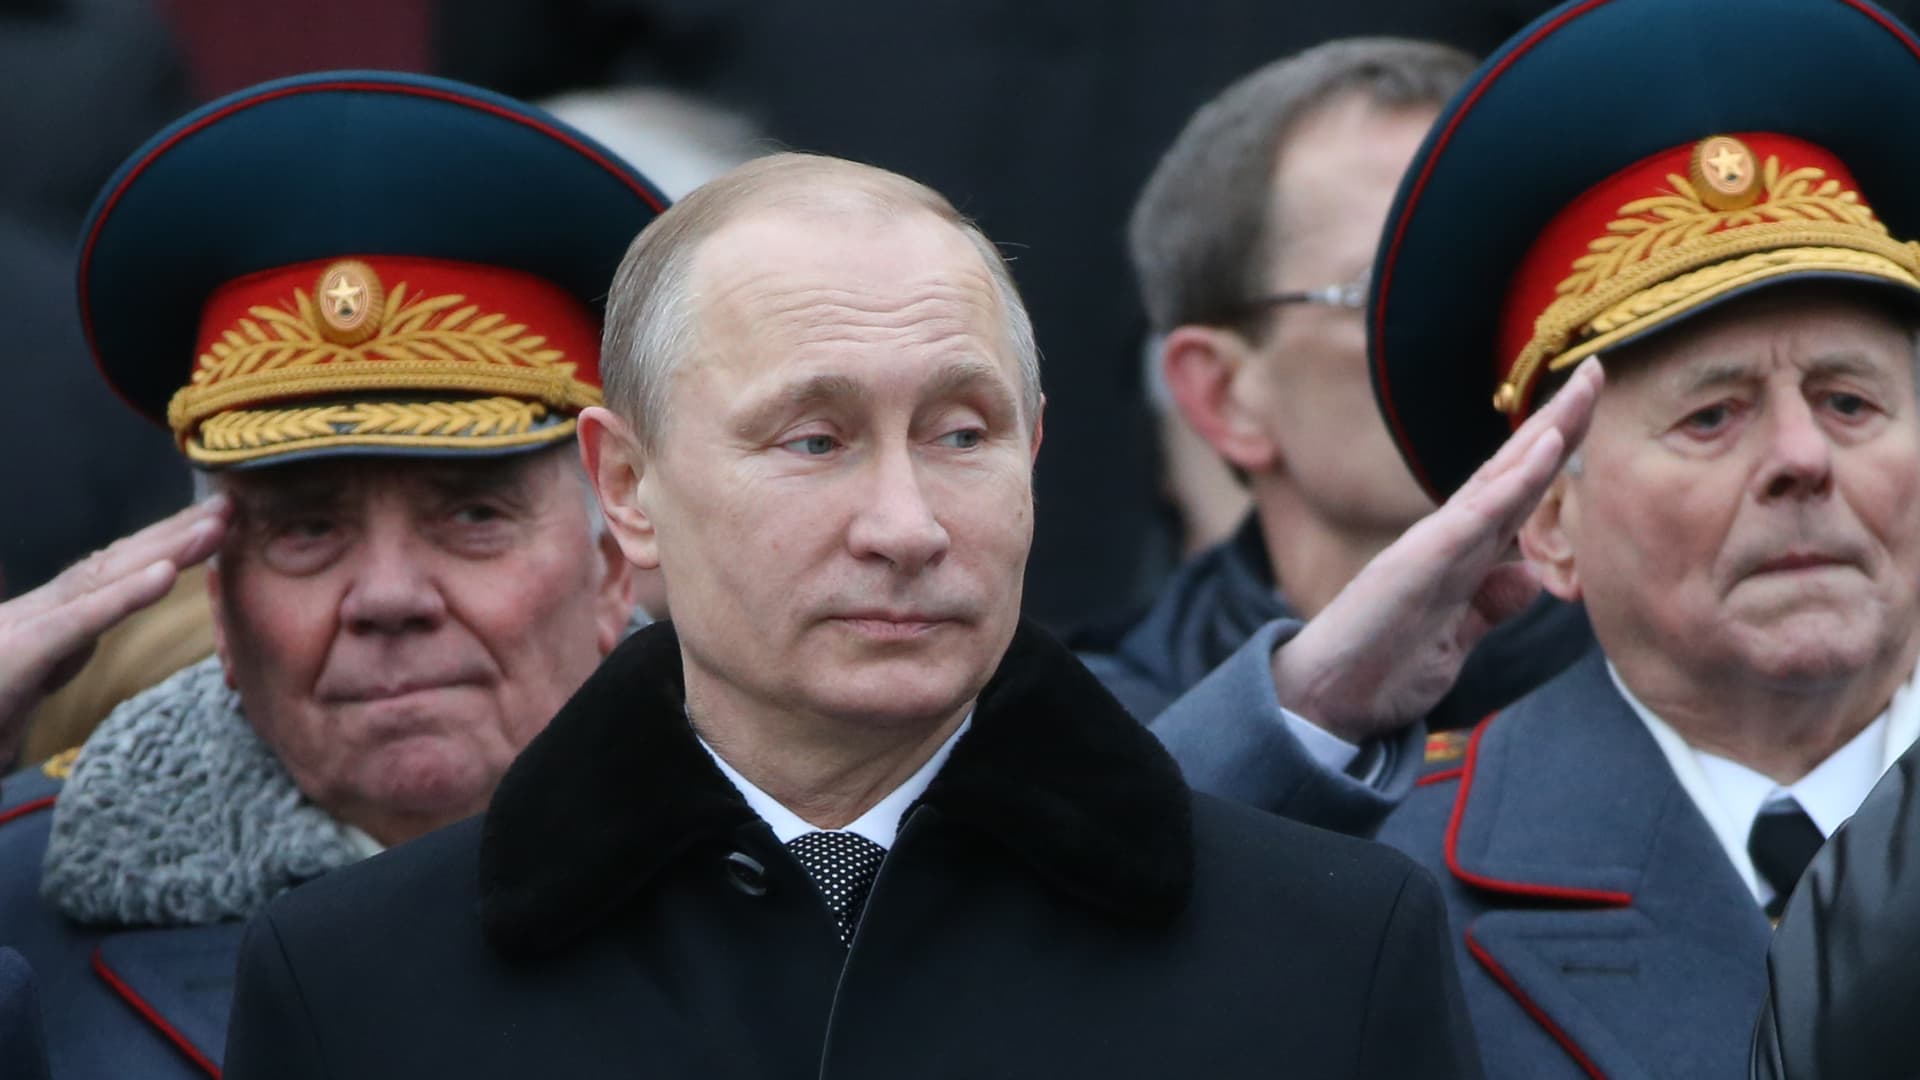 Russia’s Putin is so powerful everyone is scared to tell him the truth